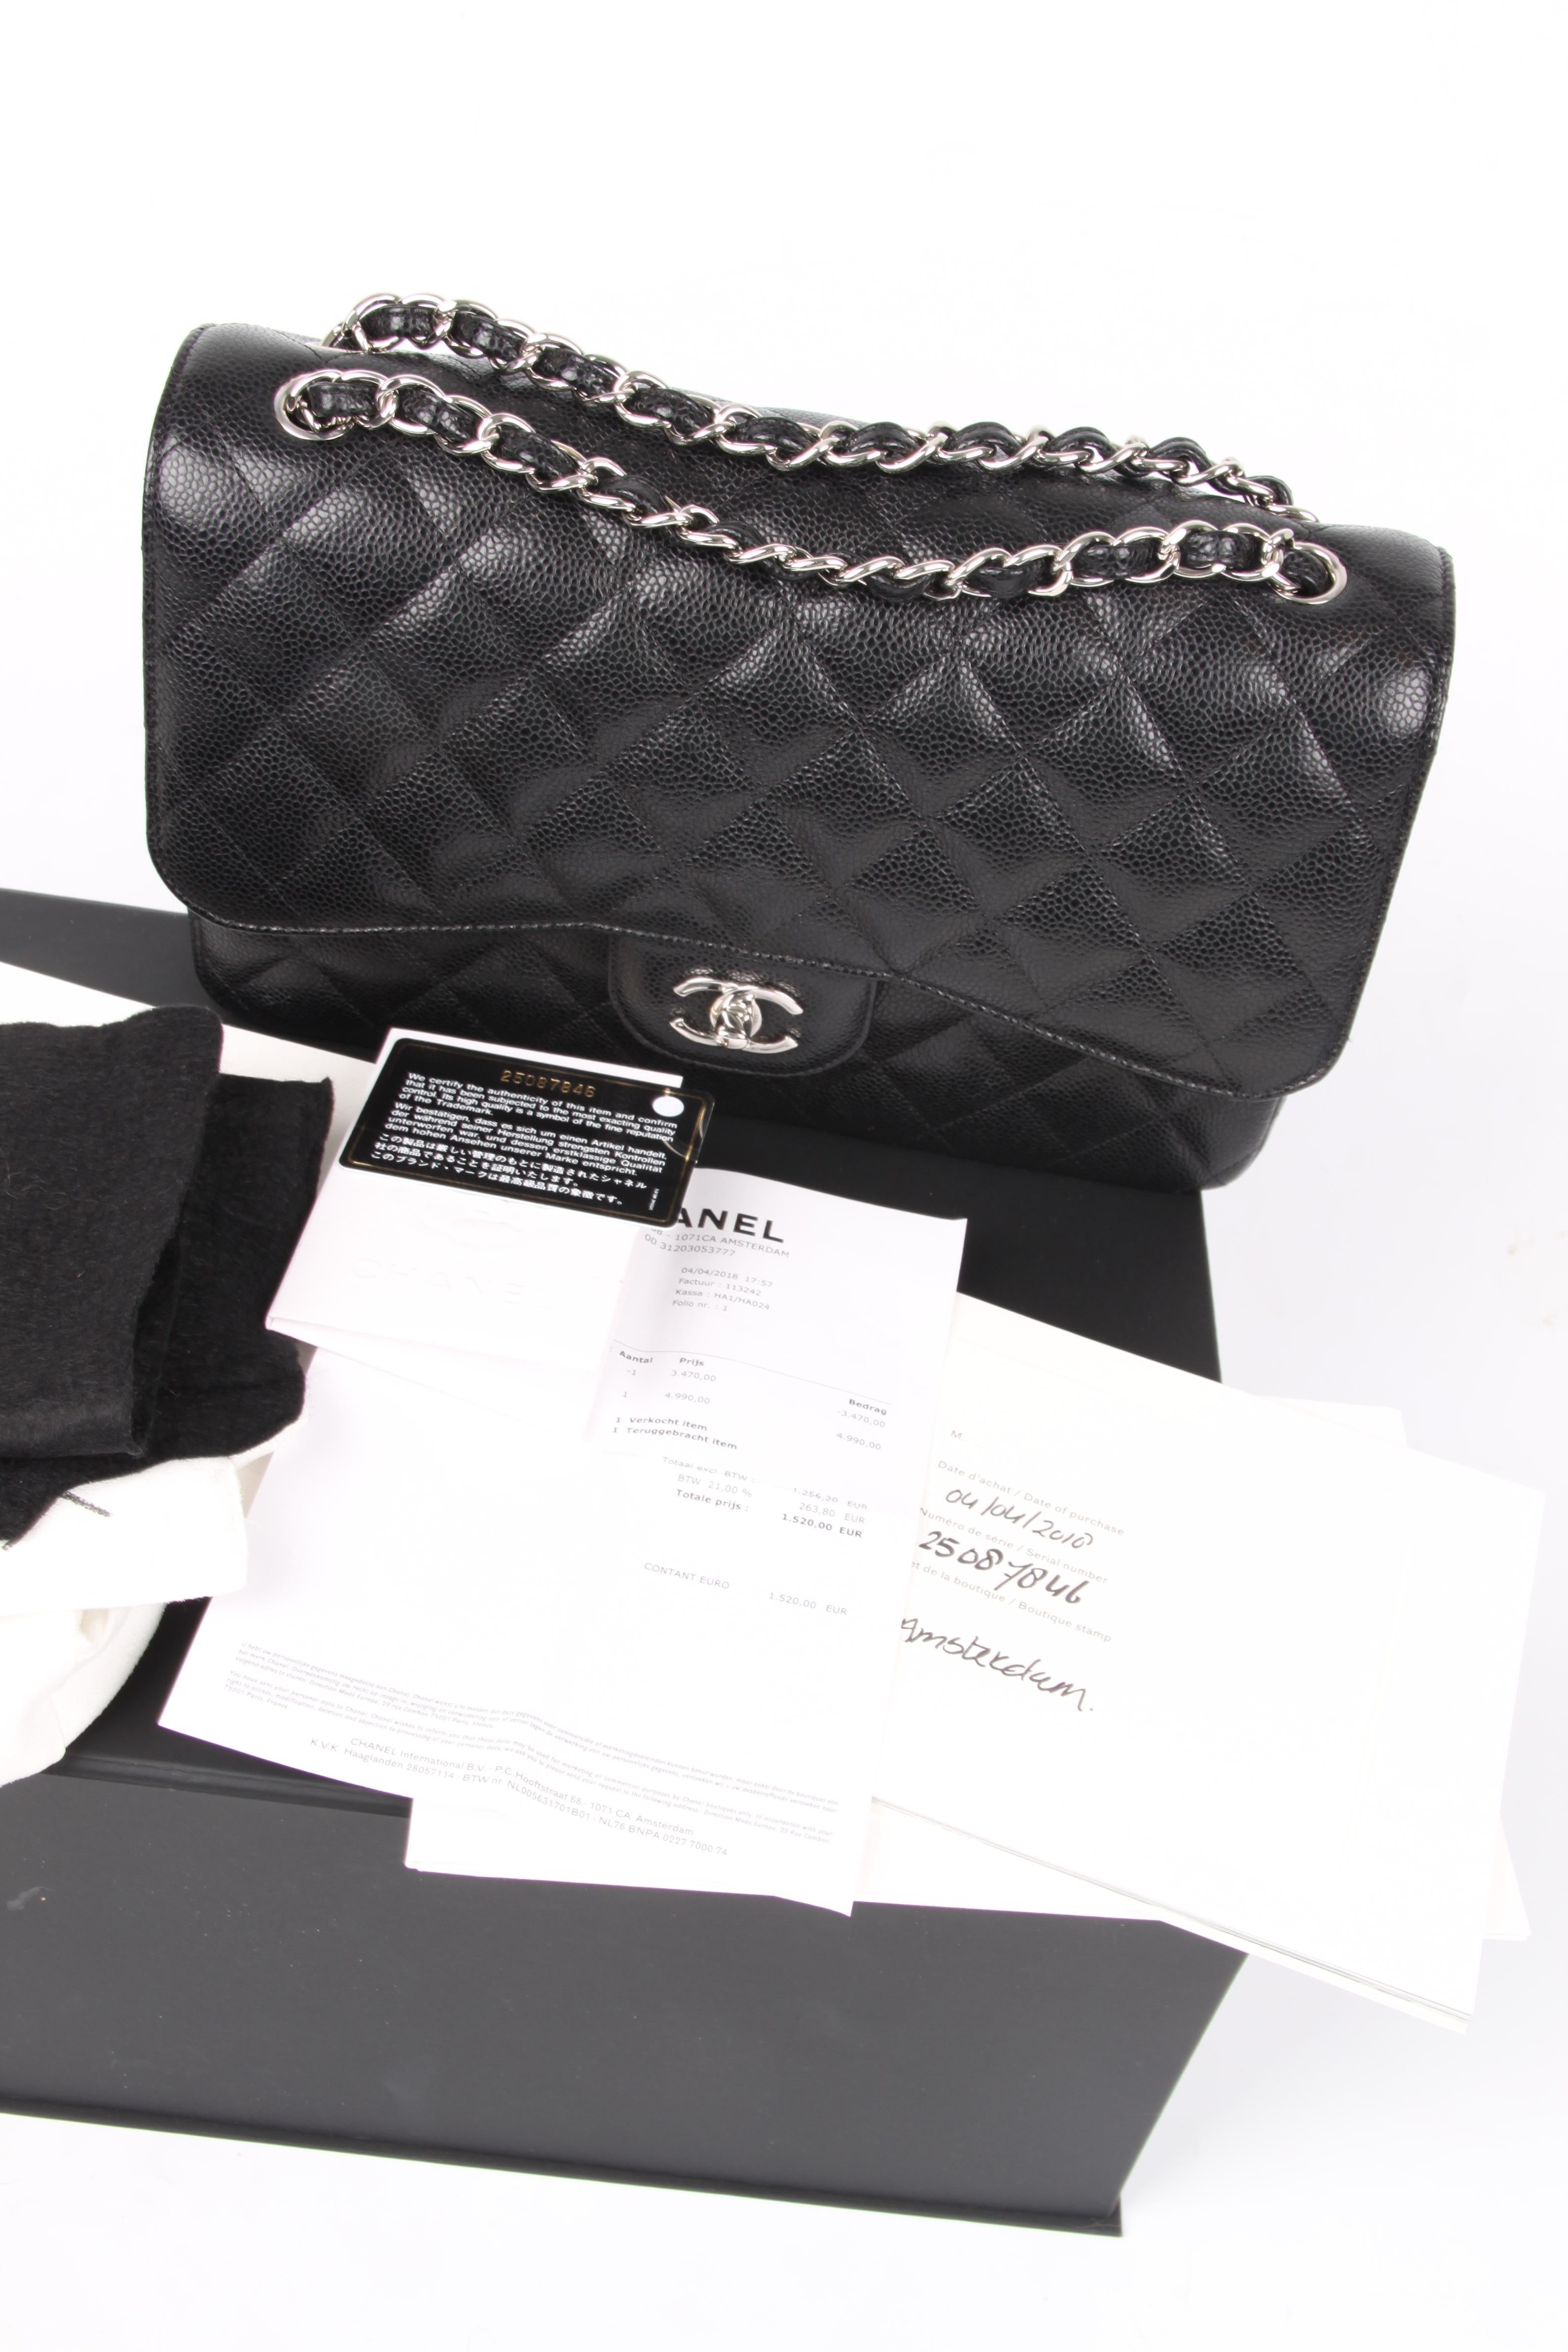 Oh yesss! Another classic bag by Chanel crafted in black caviar leather and silver-tone hardware A beauty!  

This 2.55 jumbo single flap bag is the larger size of this classic model and measures 30 centimeters in length.  A silver-tone chain which